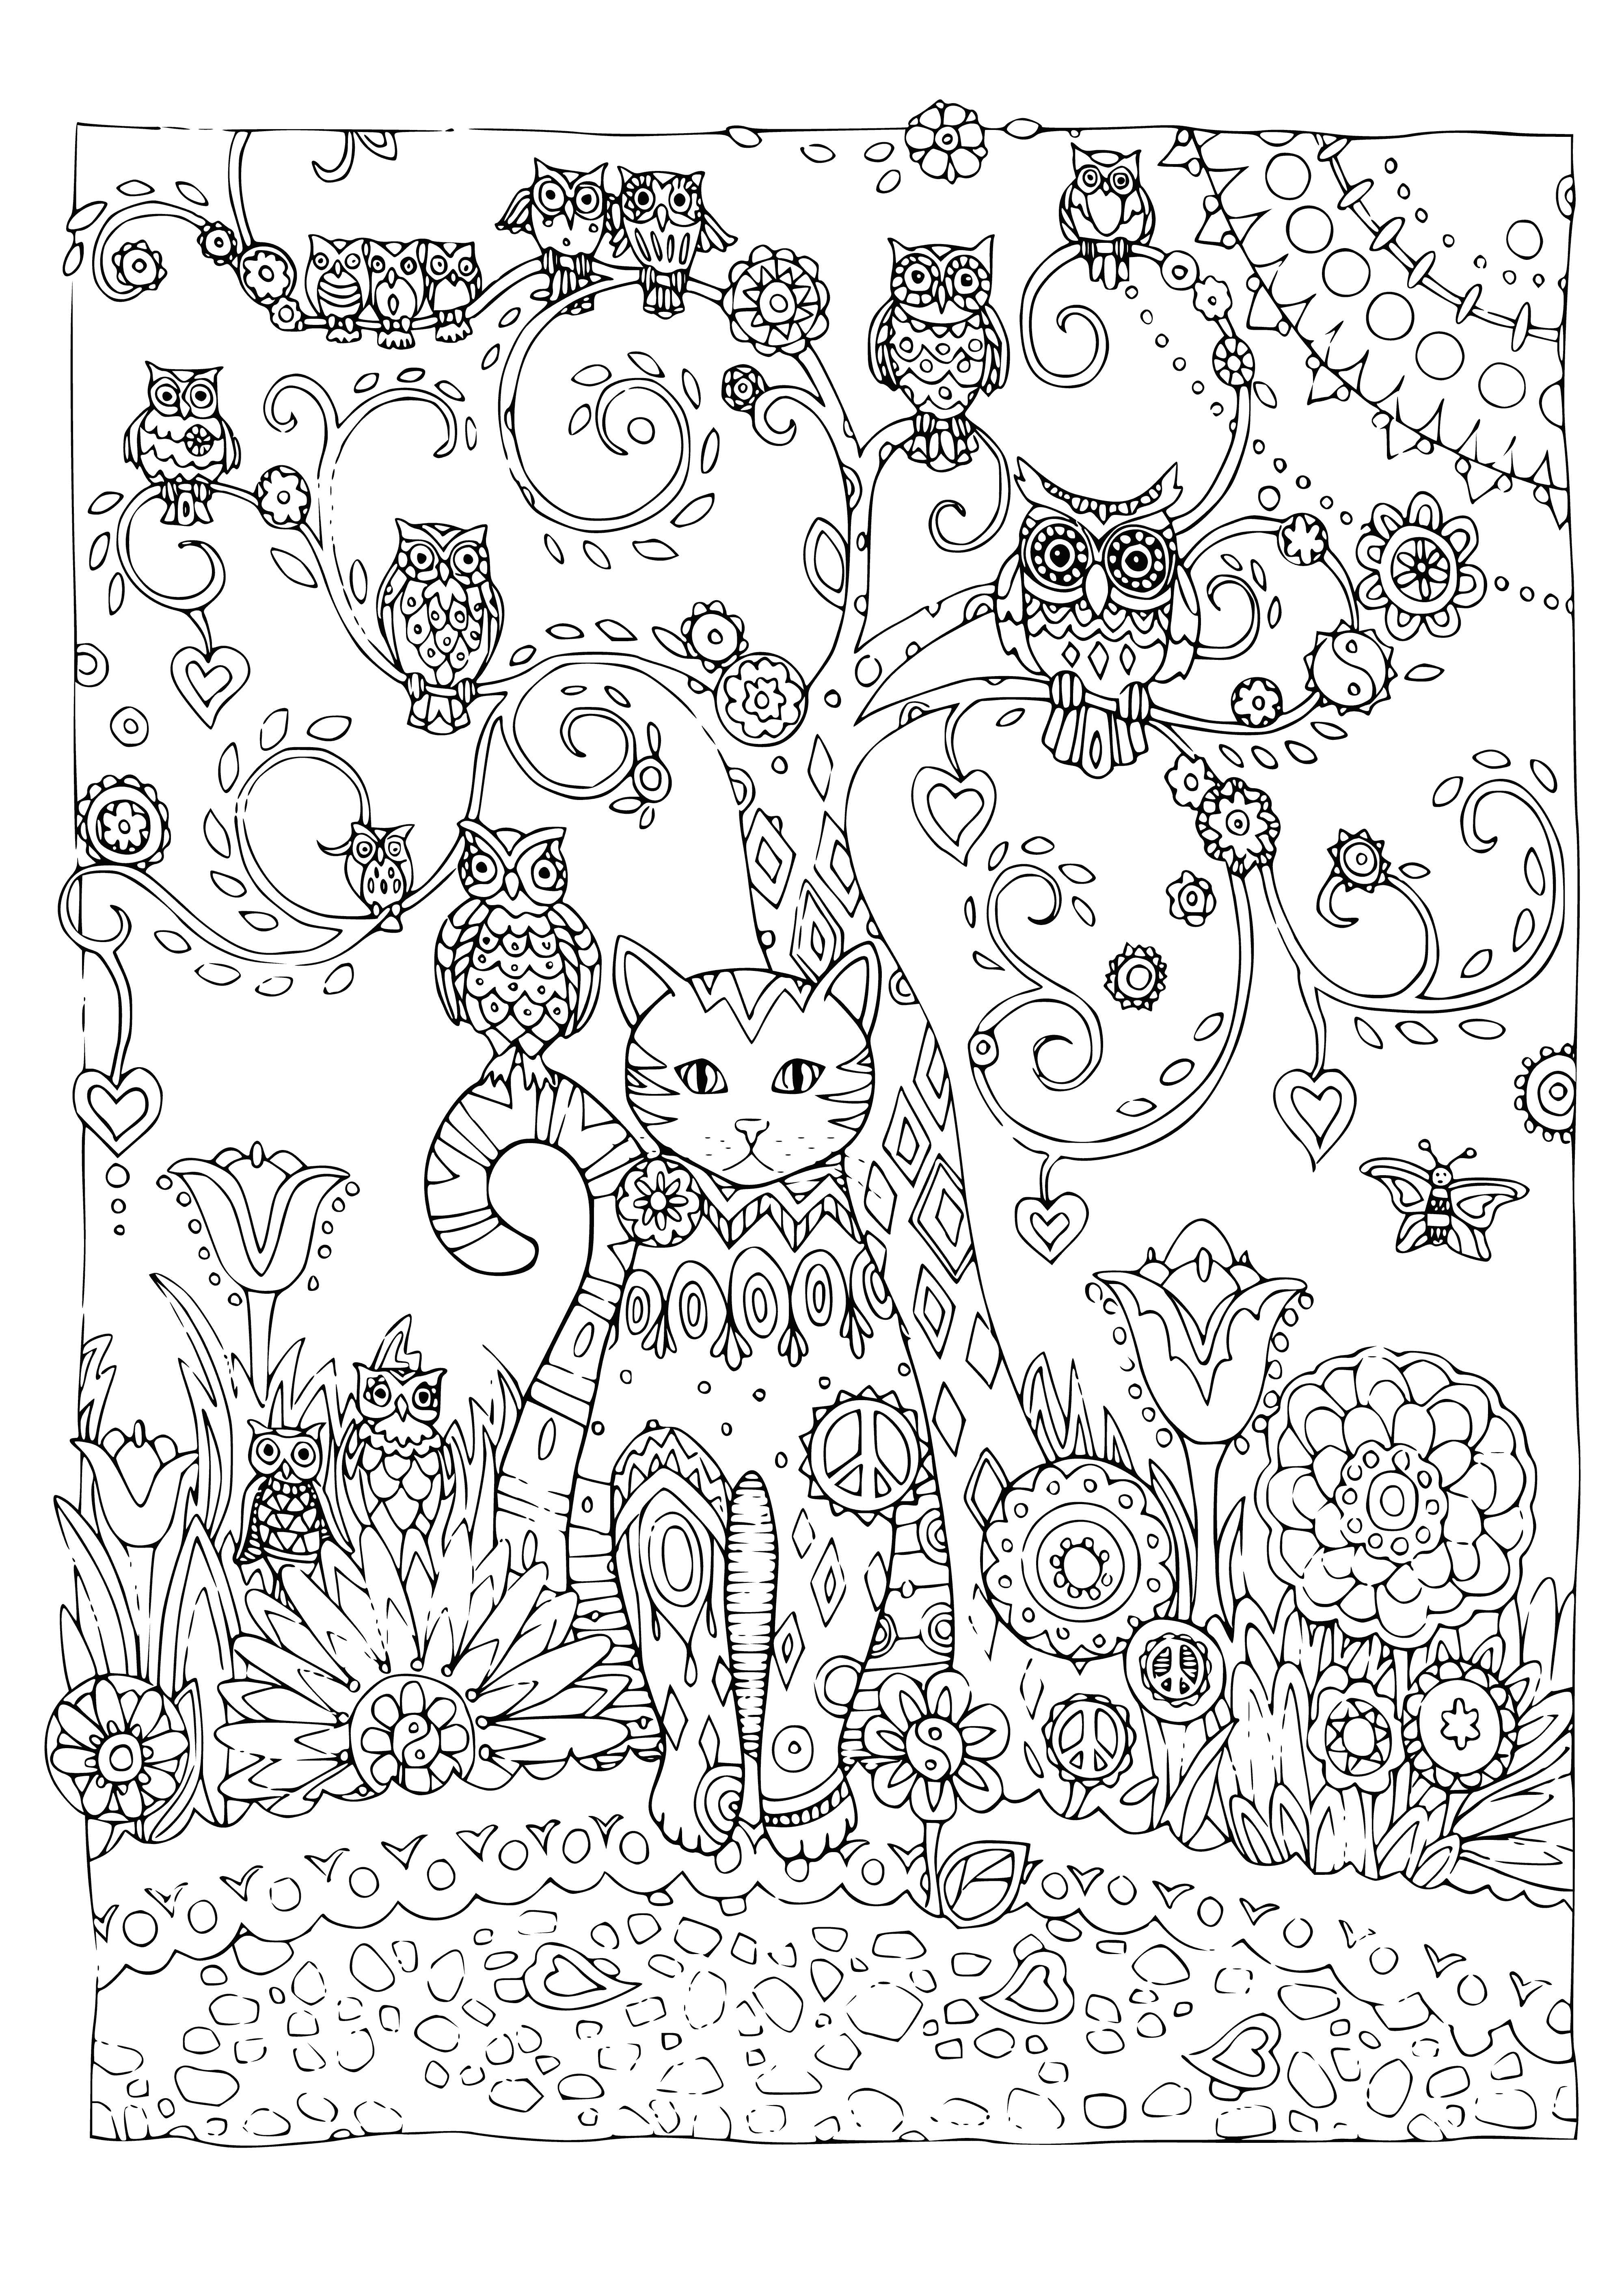 coloring page: Two cats sit on a branch, looking at two owls - one brown, one white. #catlove #owlsarecool